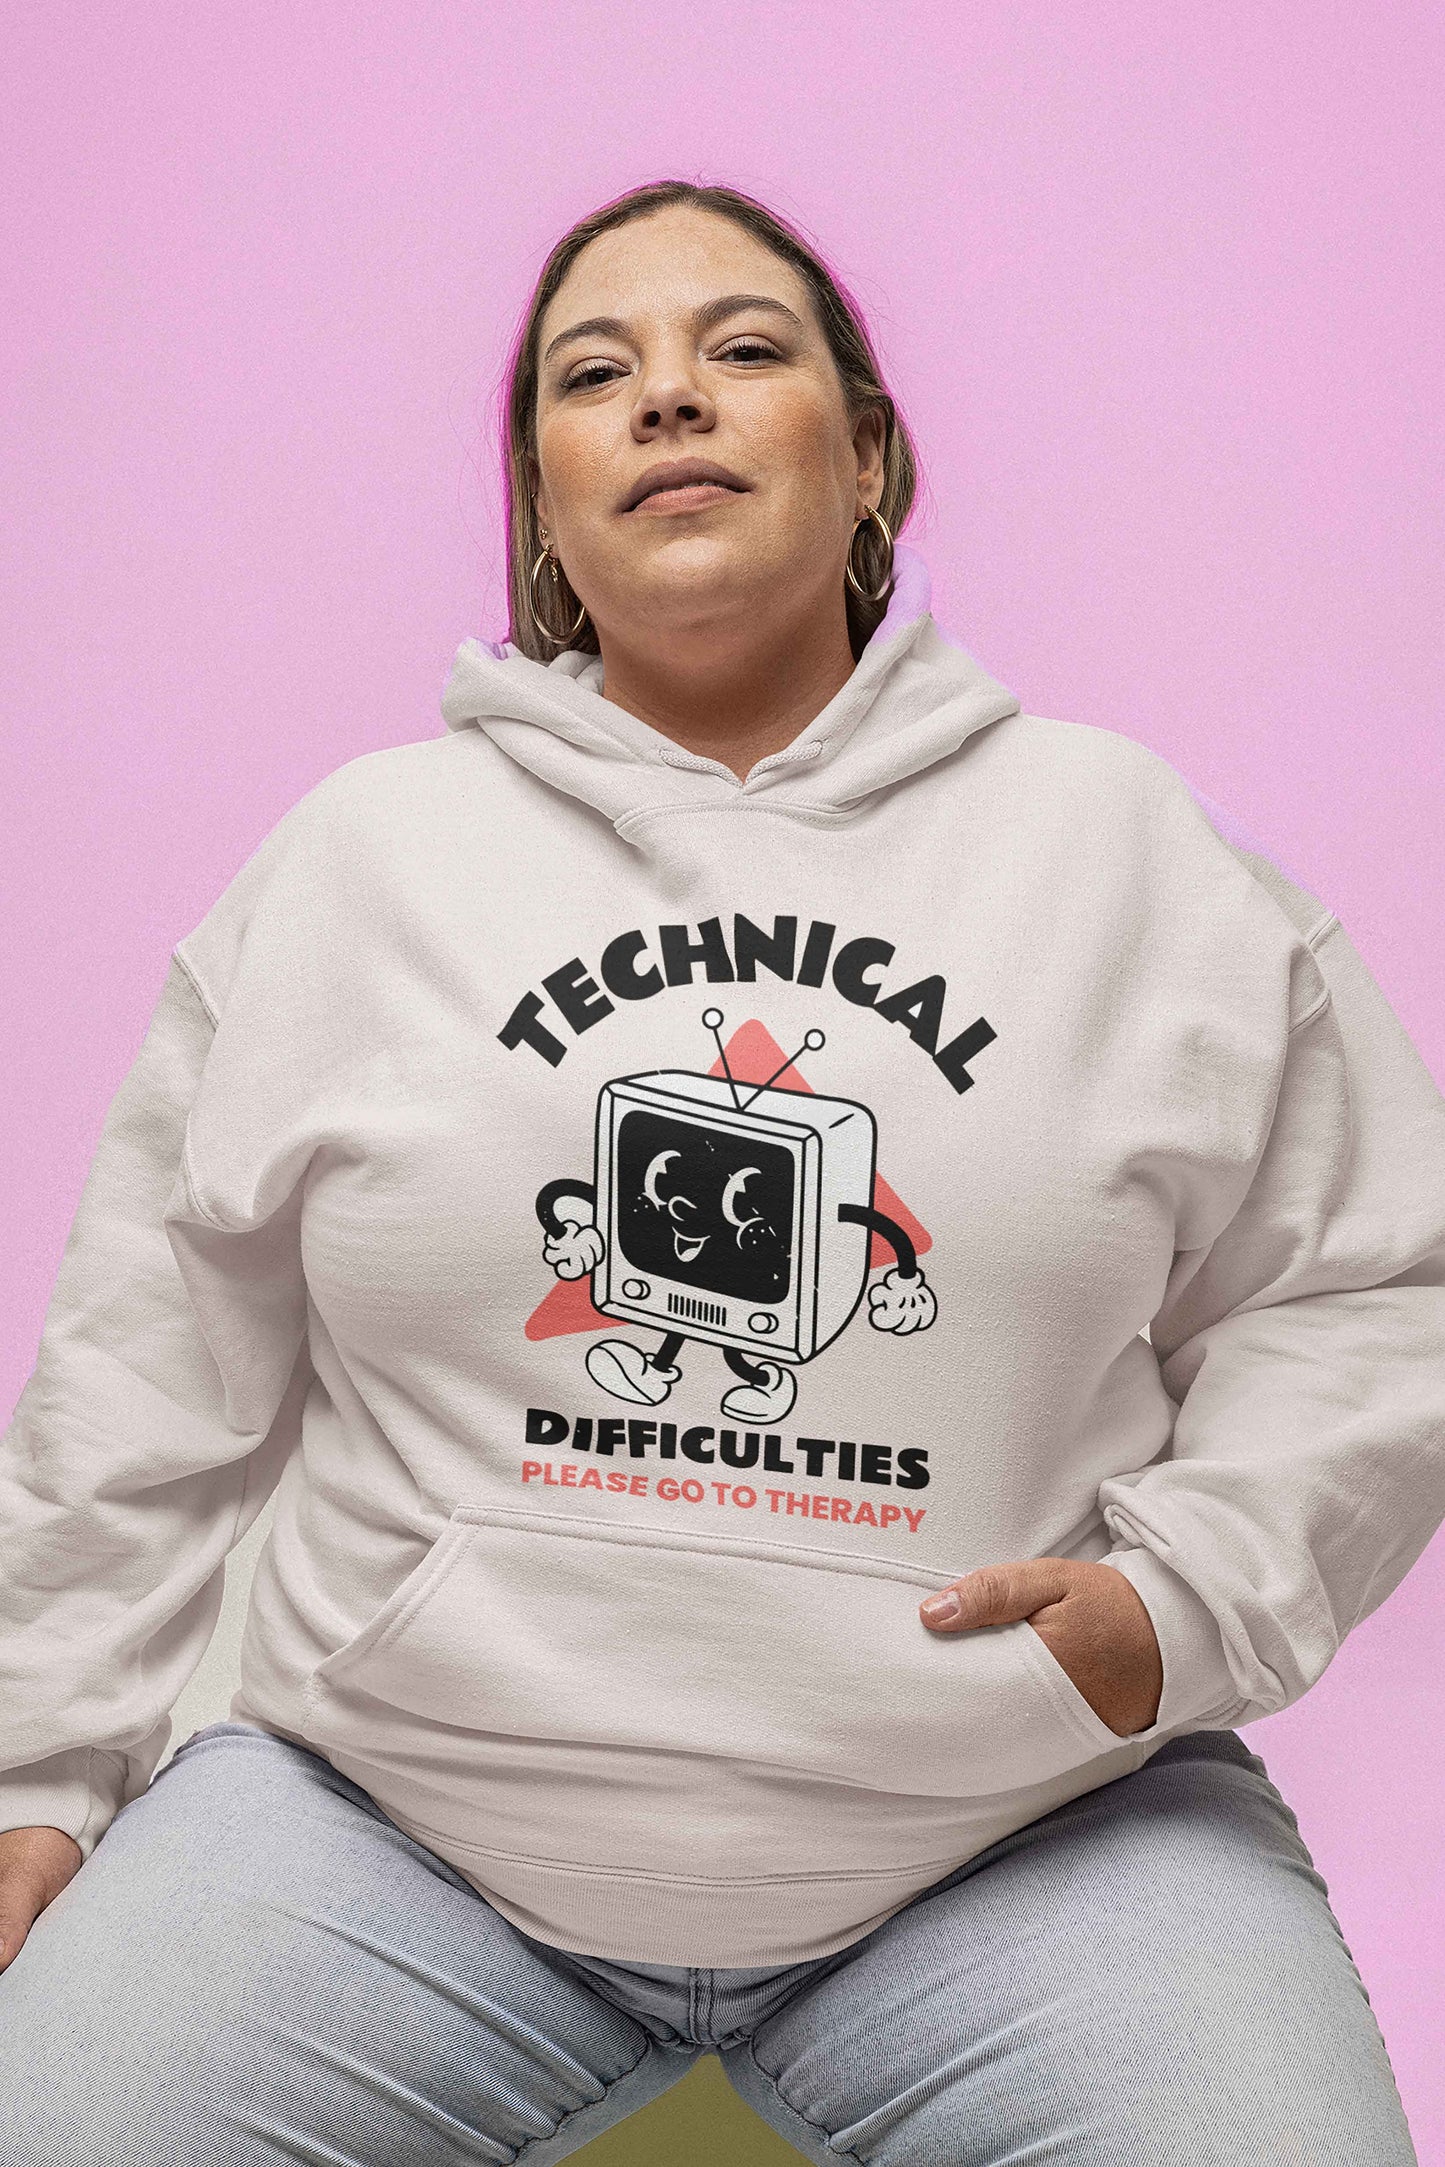 TECHNICAL DIFFICULTIES, PLEASE GO TO THERAPY - Unisex Pullover Hoodie in Vintage White